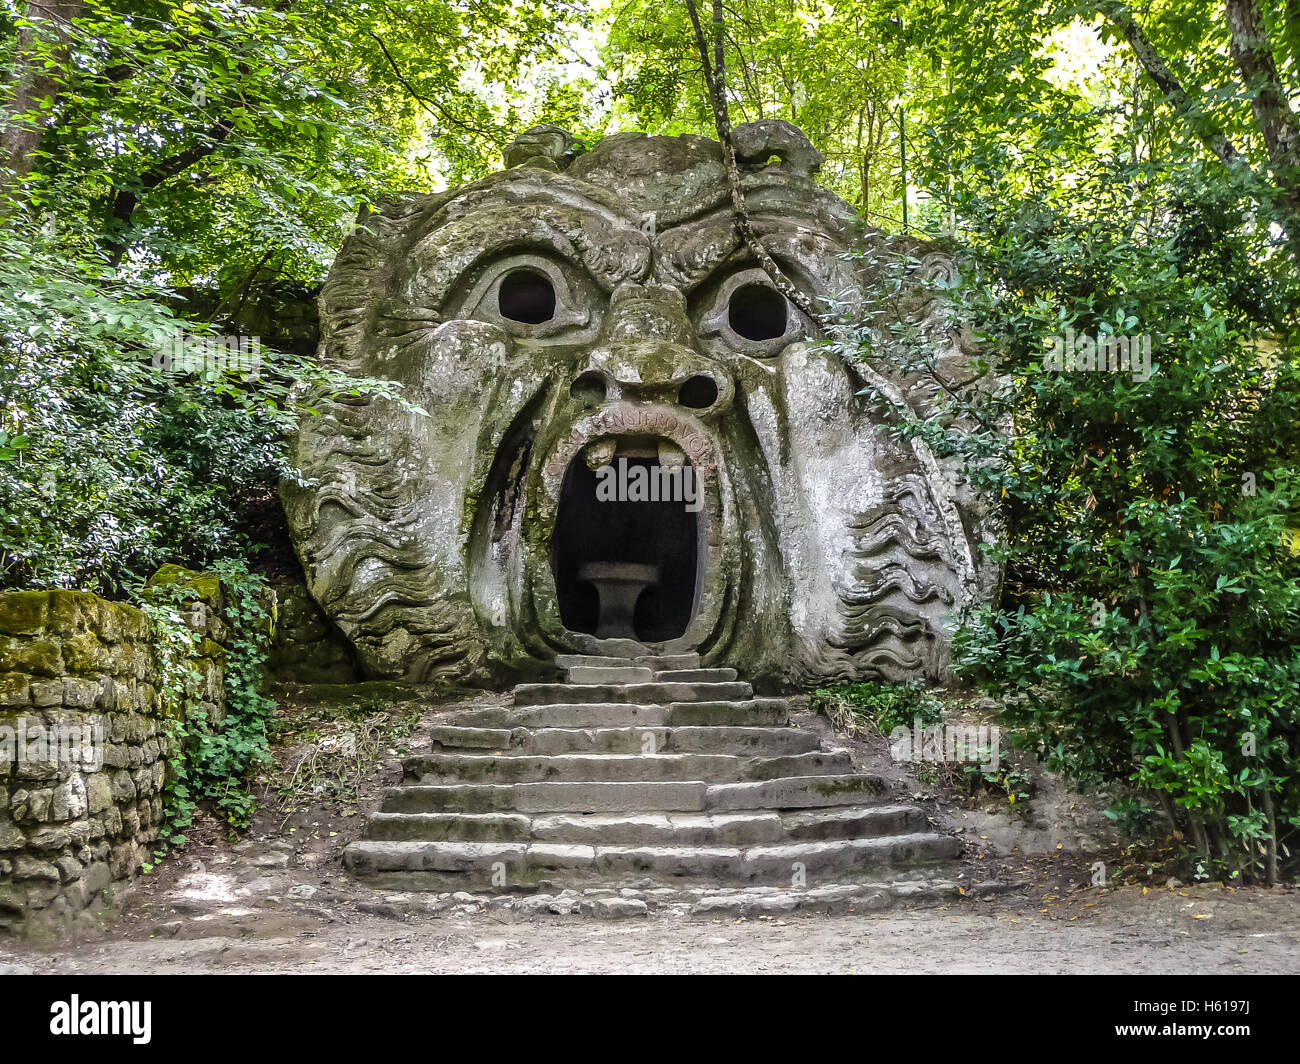 Orcus mouth sculpture at famous Parco dei Mostri (Park of the Monsters), also named Sacro Bosco (Sacred Grove) or Gardens of Bomarzo, Lazio, Italy Stock Photo